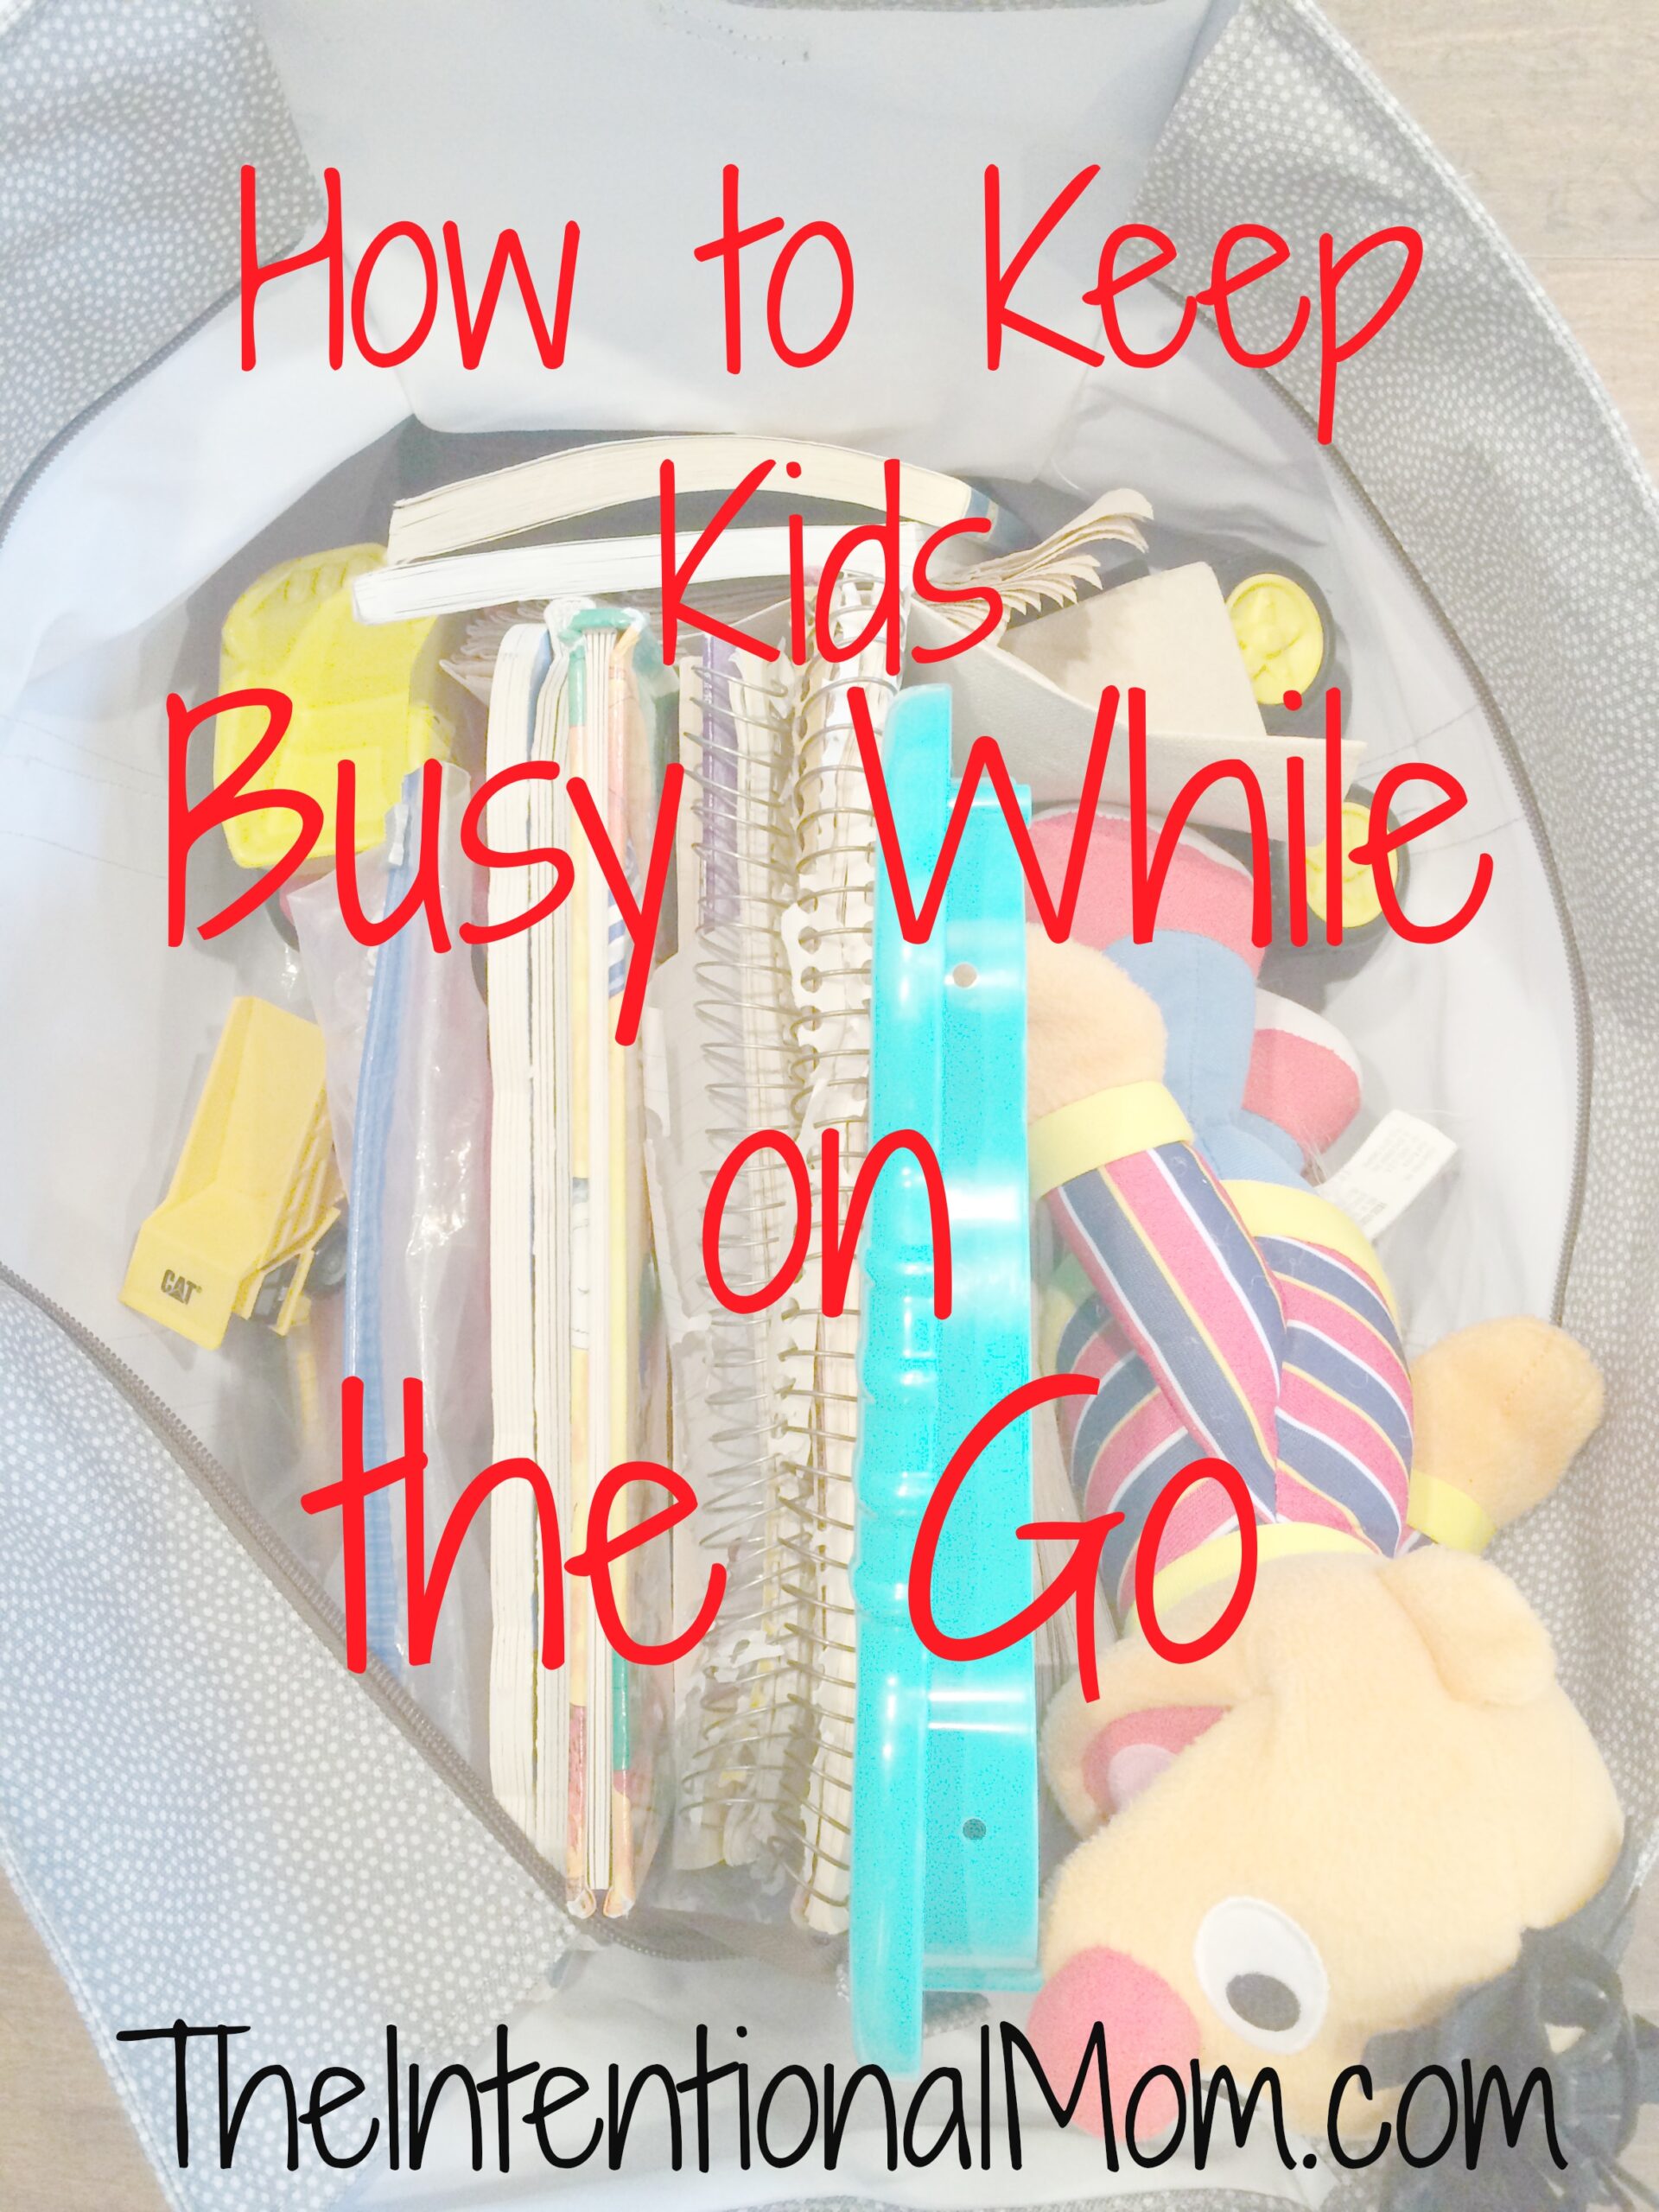 How to Keep Kids Busy While on the Go